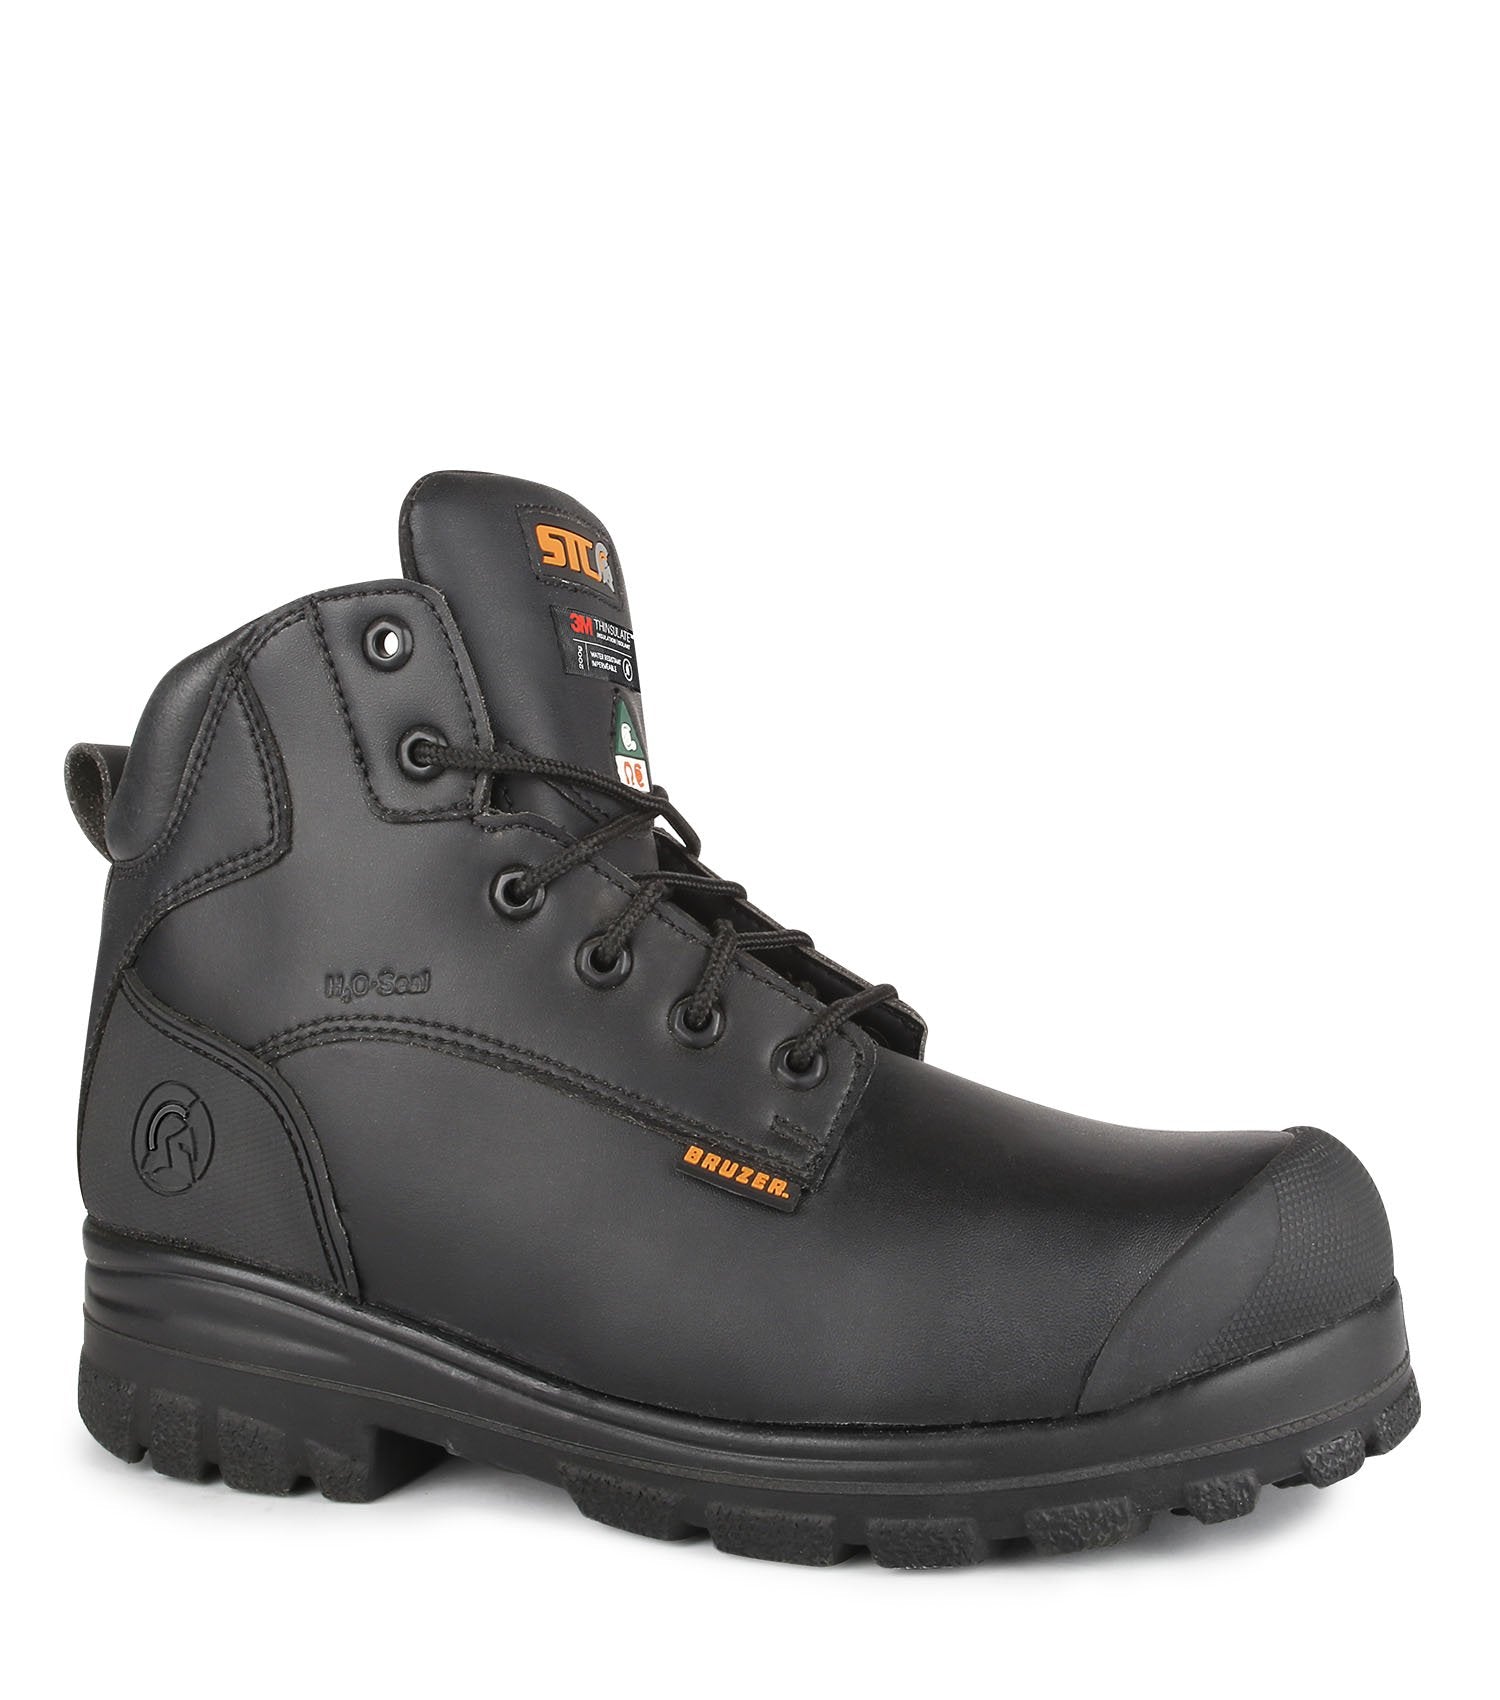 STC Trump 6" Chemtech Safety Boots | Black | Size 4 - 14 Work Boots - Cleanflow